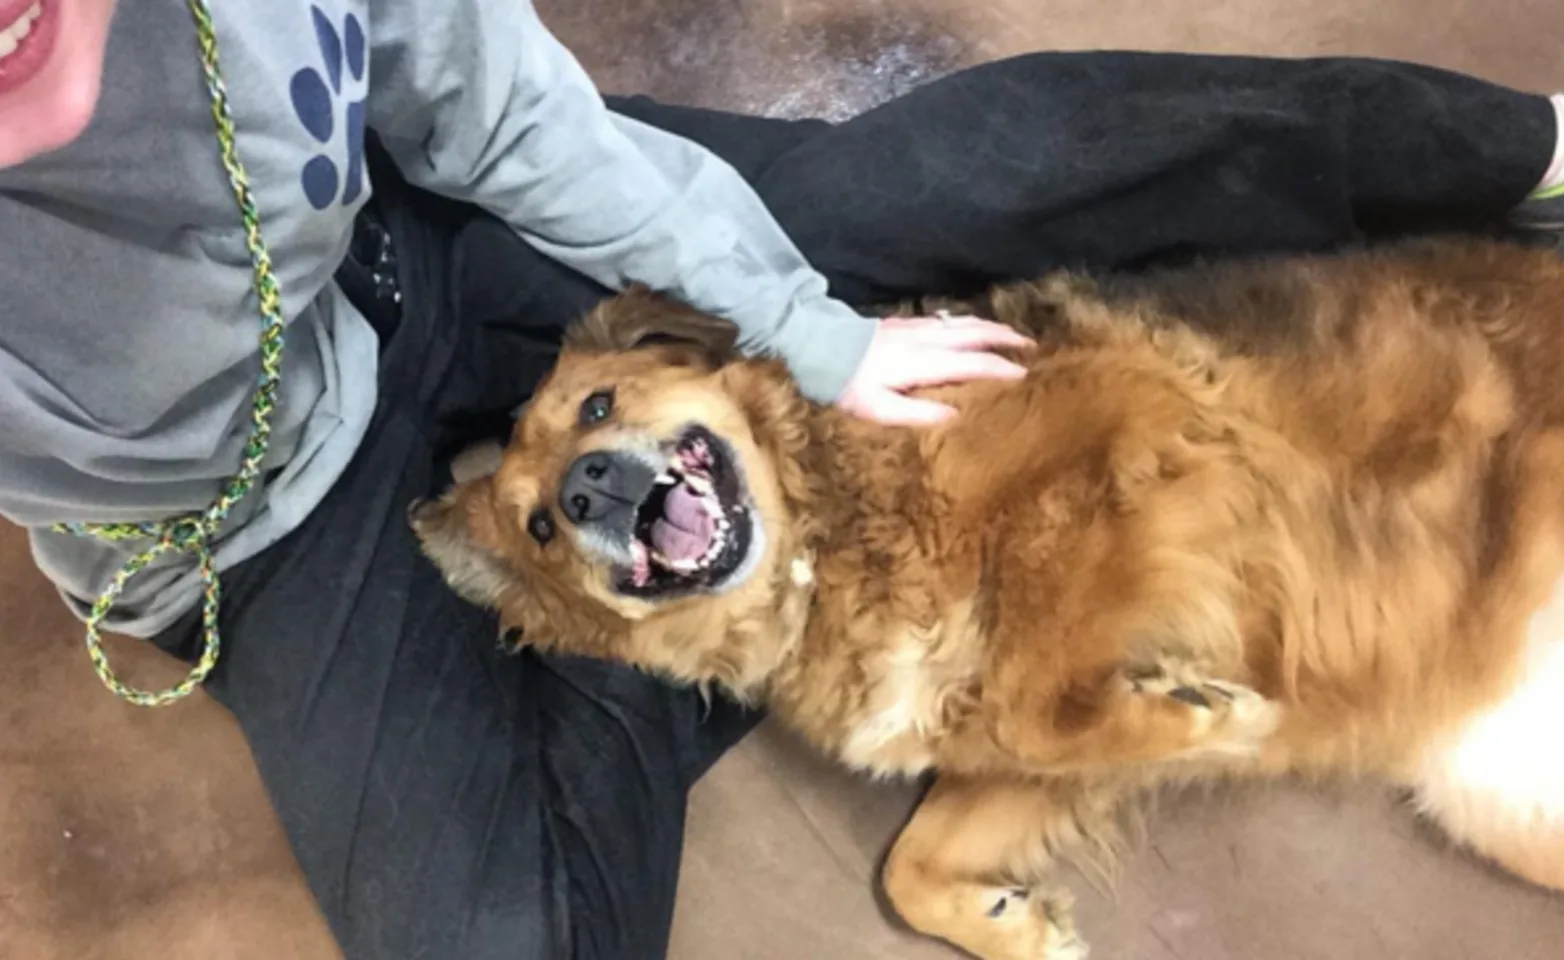 Dog laying in staff's lap being pet